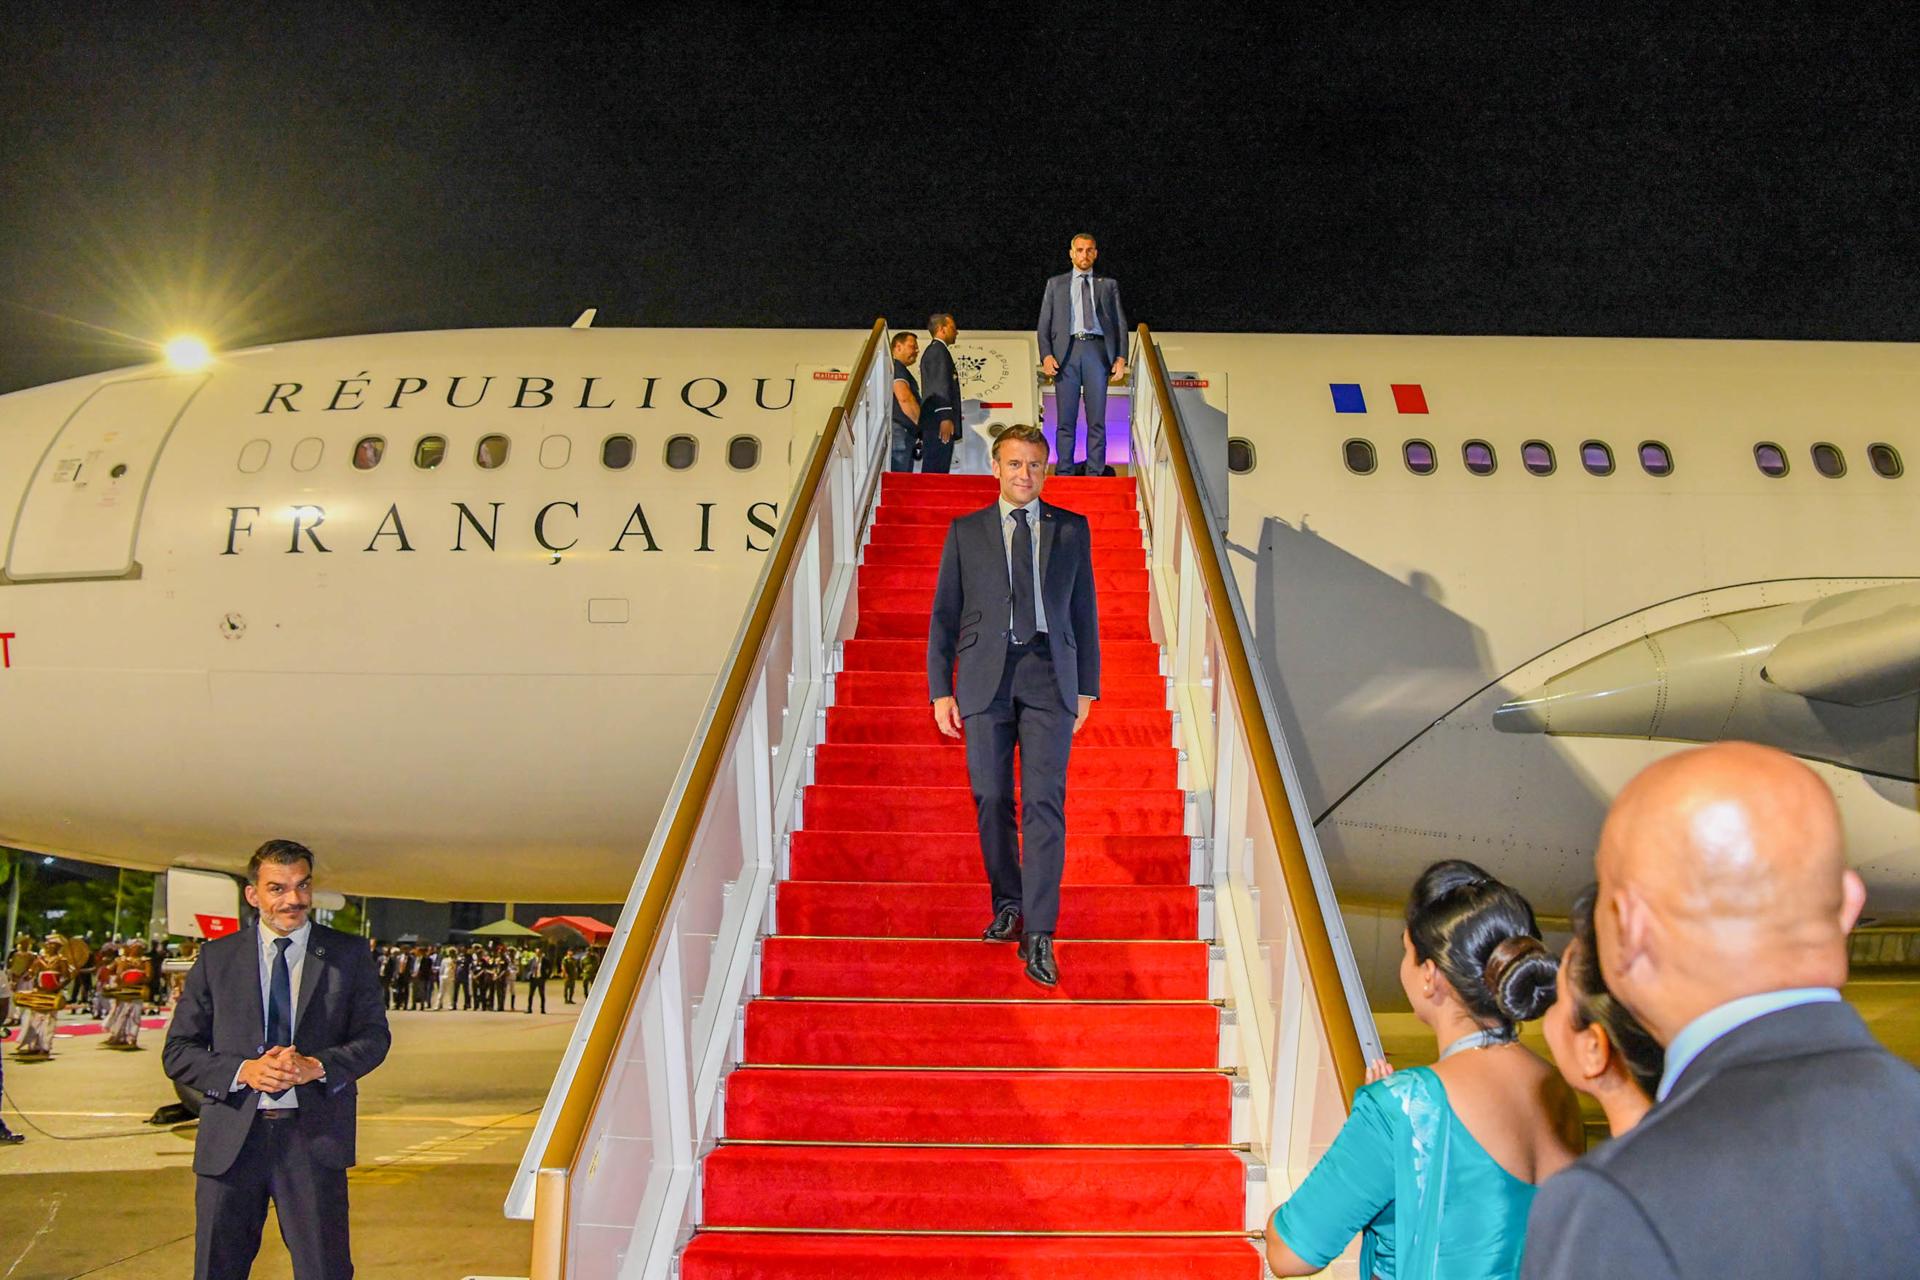 A handout photo made available by the Sri Lankan President's Media Division shows French President Emmanuel Macron arriving at Bandaranaike International Airport in Colombo, Sri Lanka, 28 July 2023 (issued 29 July 2023). EFE/EPA/President's Media Division HANDOUT EDITORIAL USE ONLY/NO SALES
